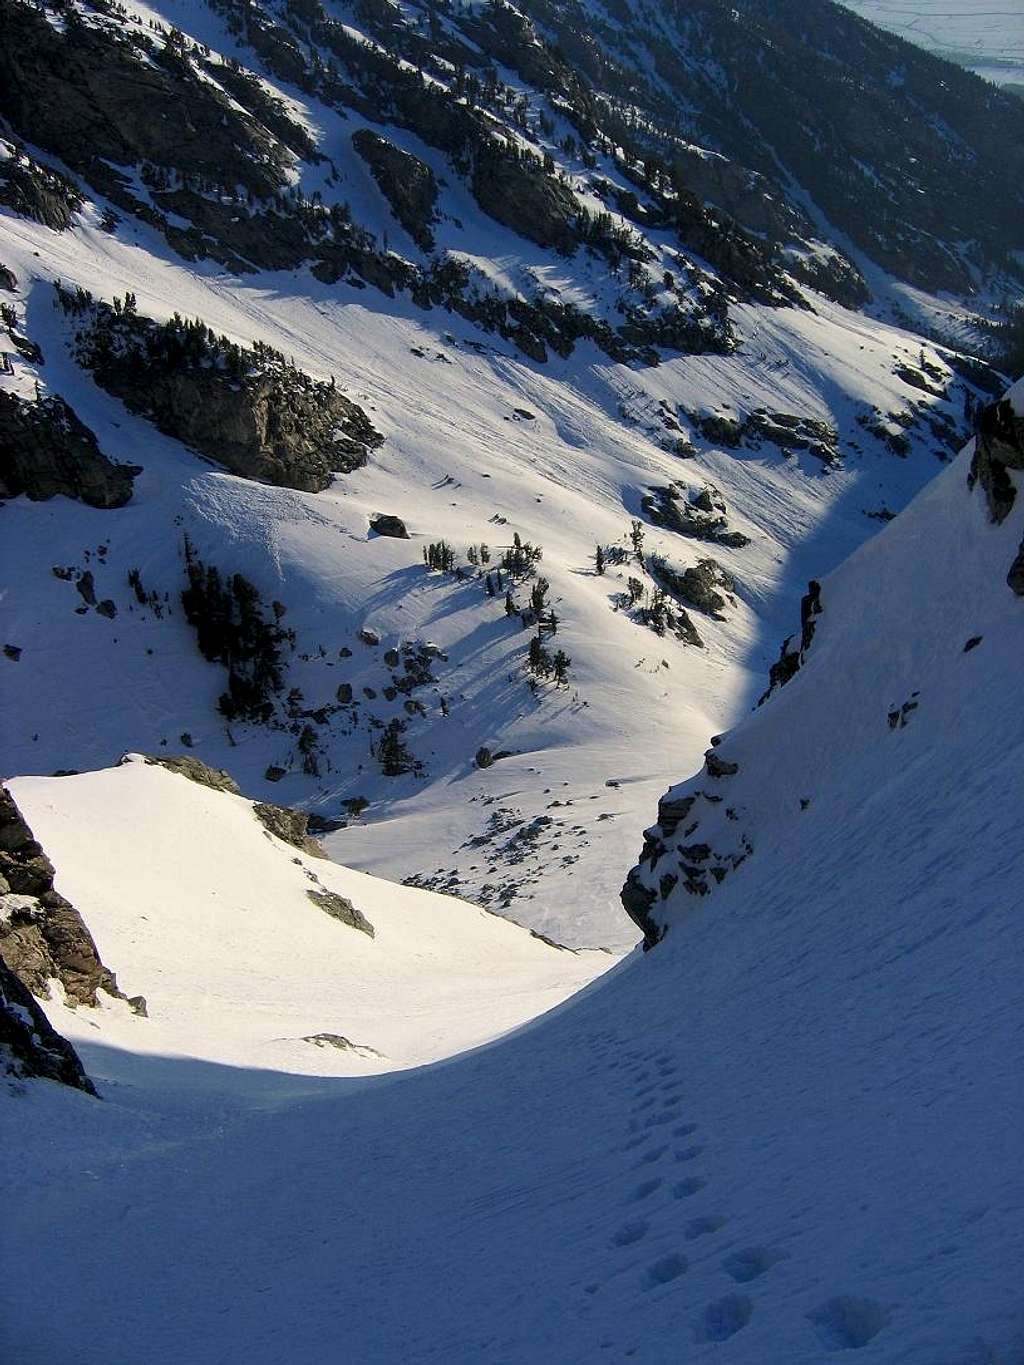 Looking Down the Lower Couloir